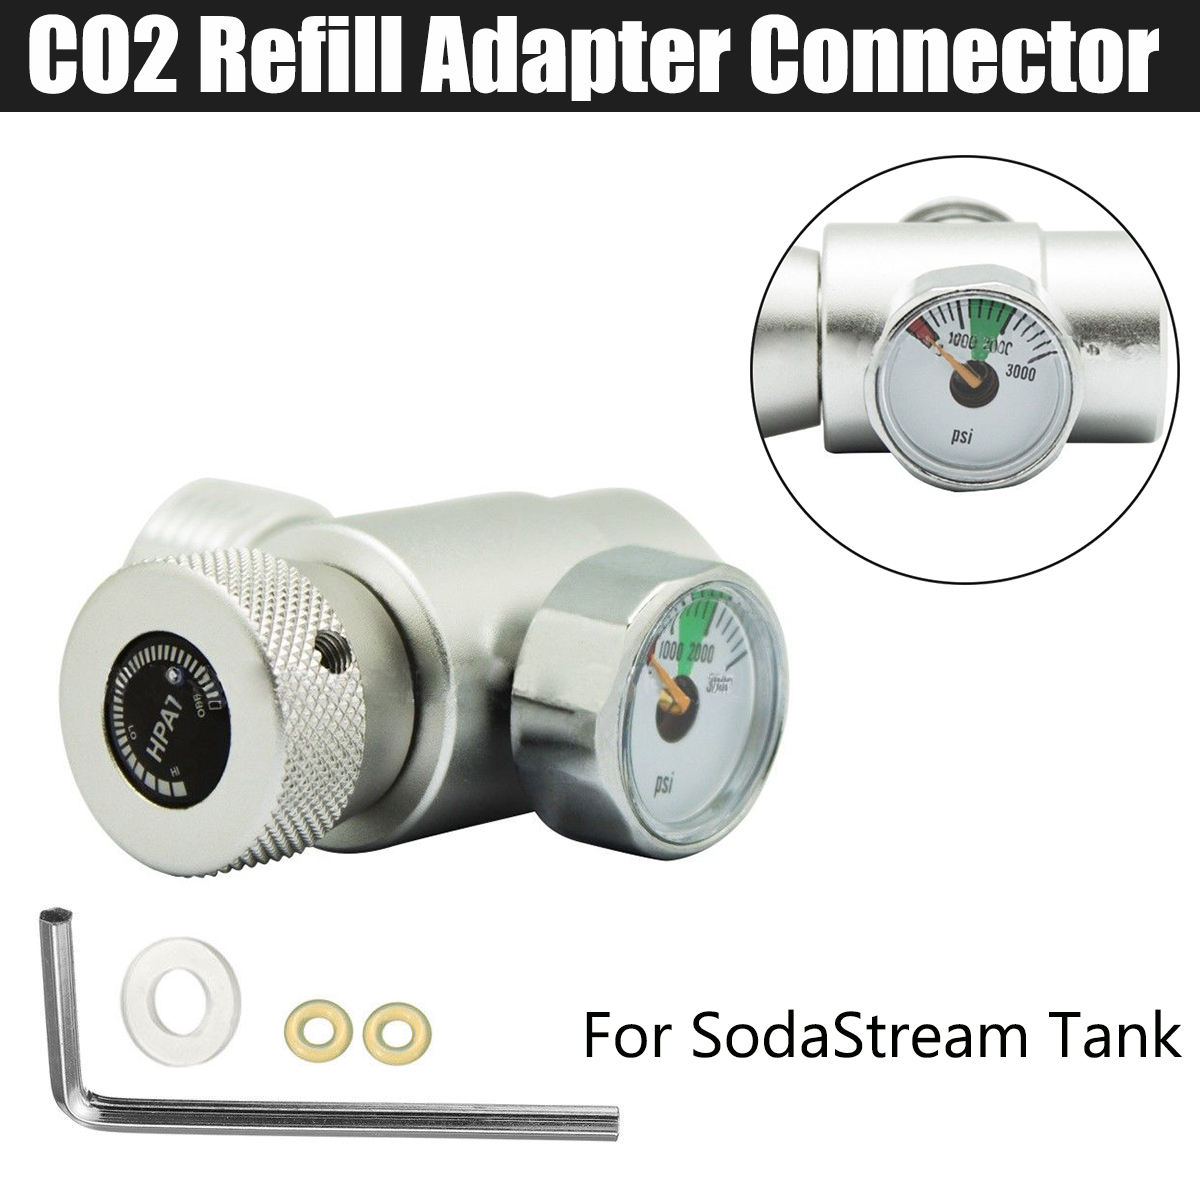 W218-14-Thread-CO2-Gas-Filling-Refill-Adapter-Connector-For-Sodastream-Tank-1362914-1